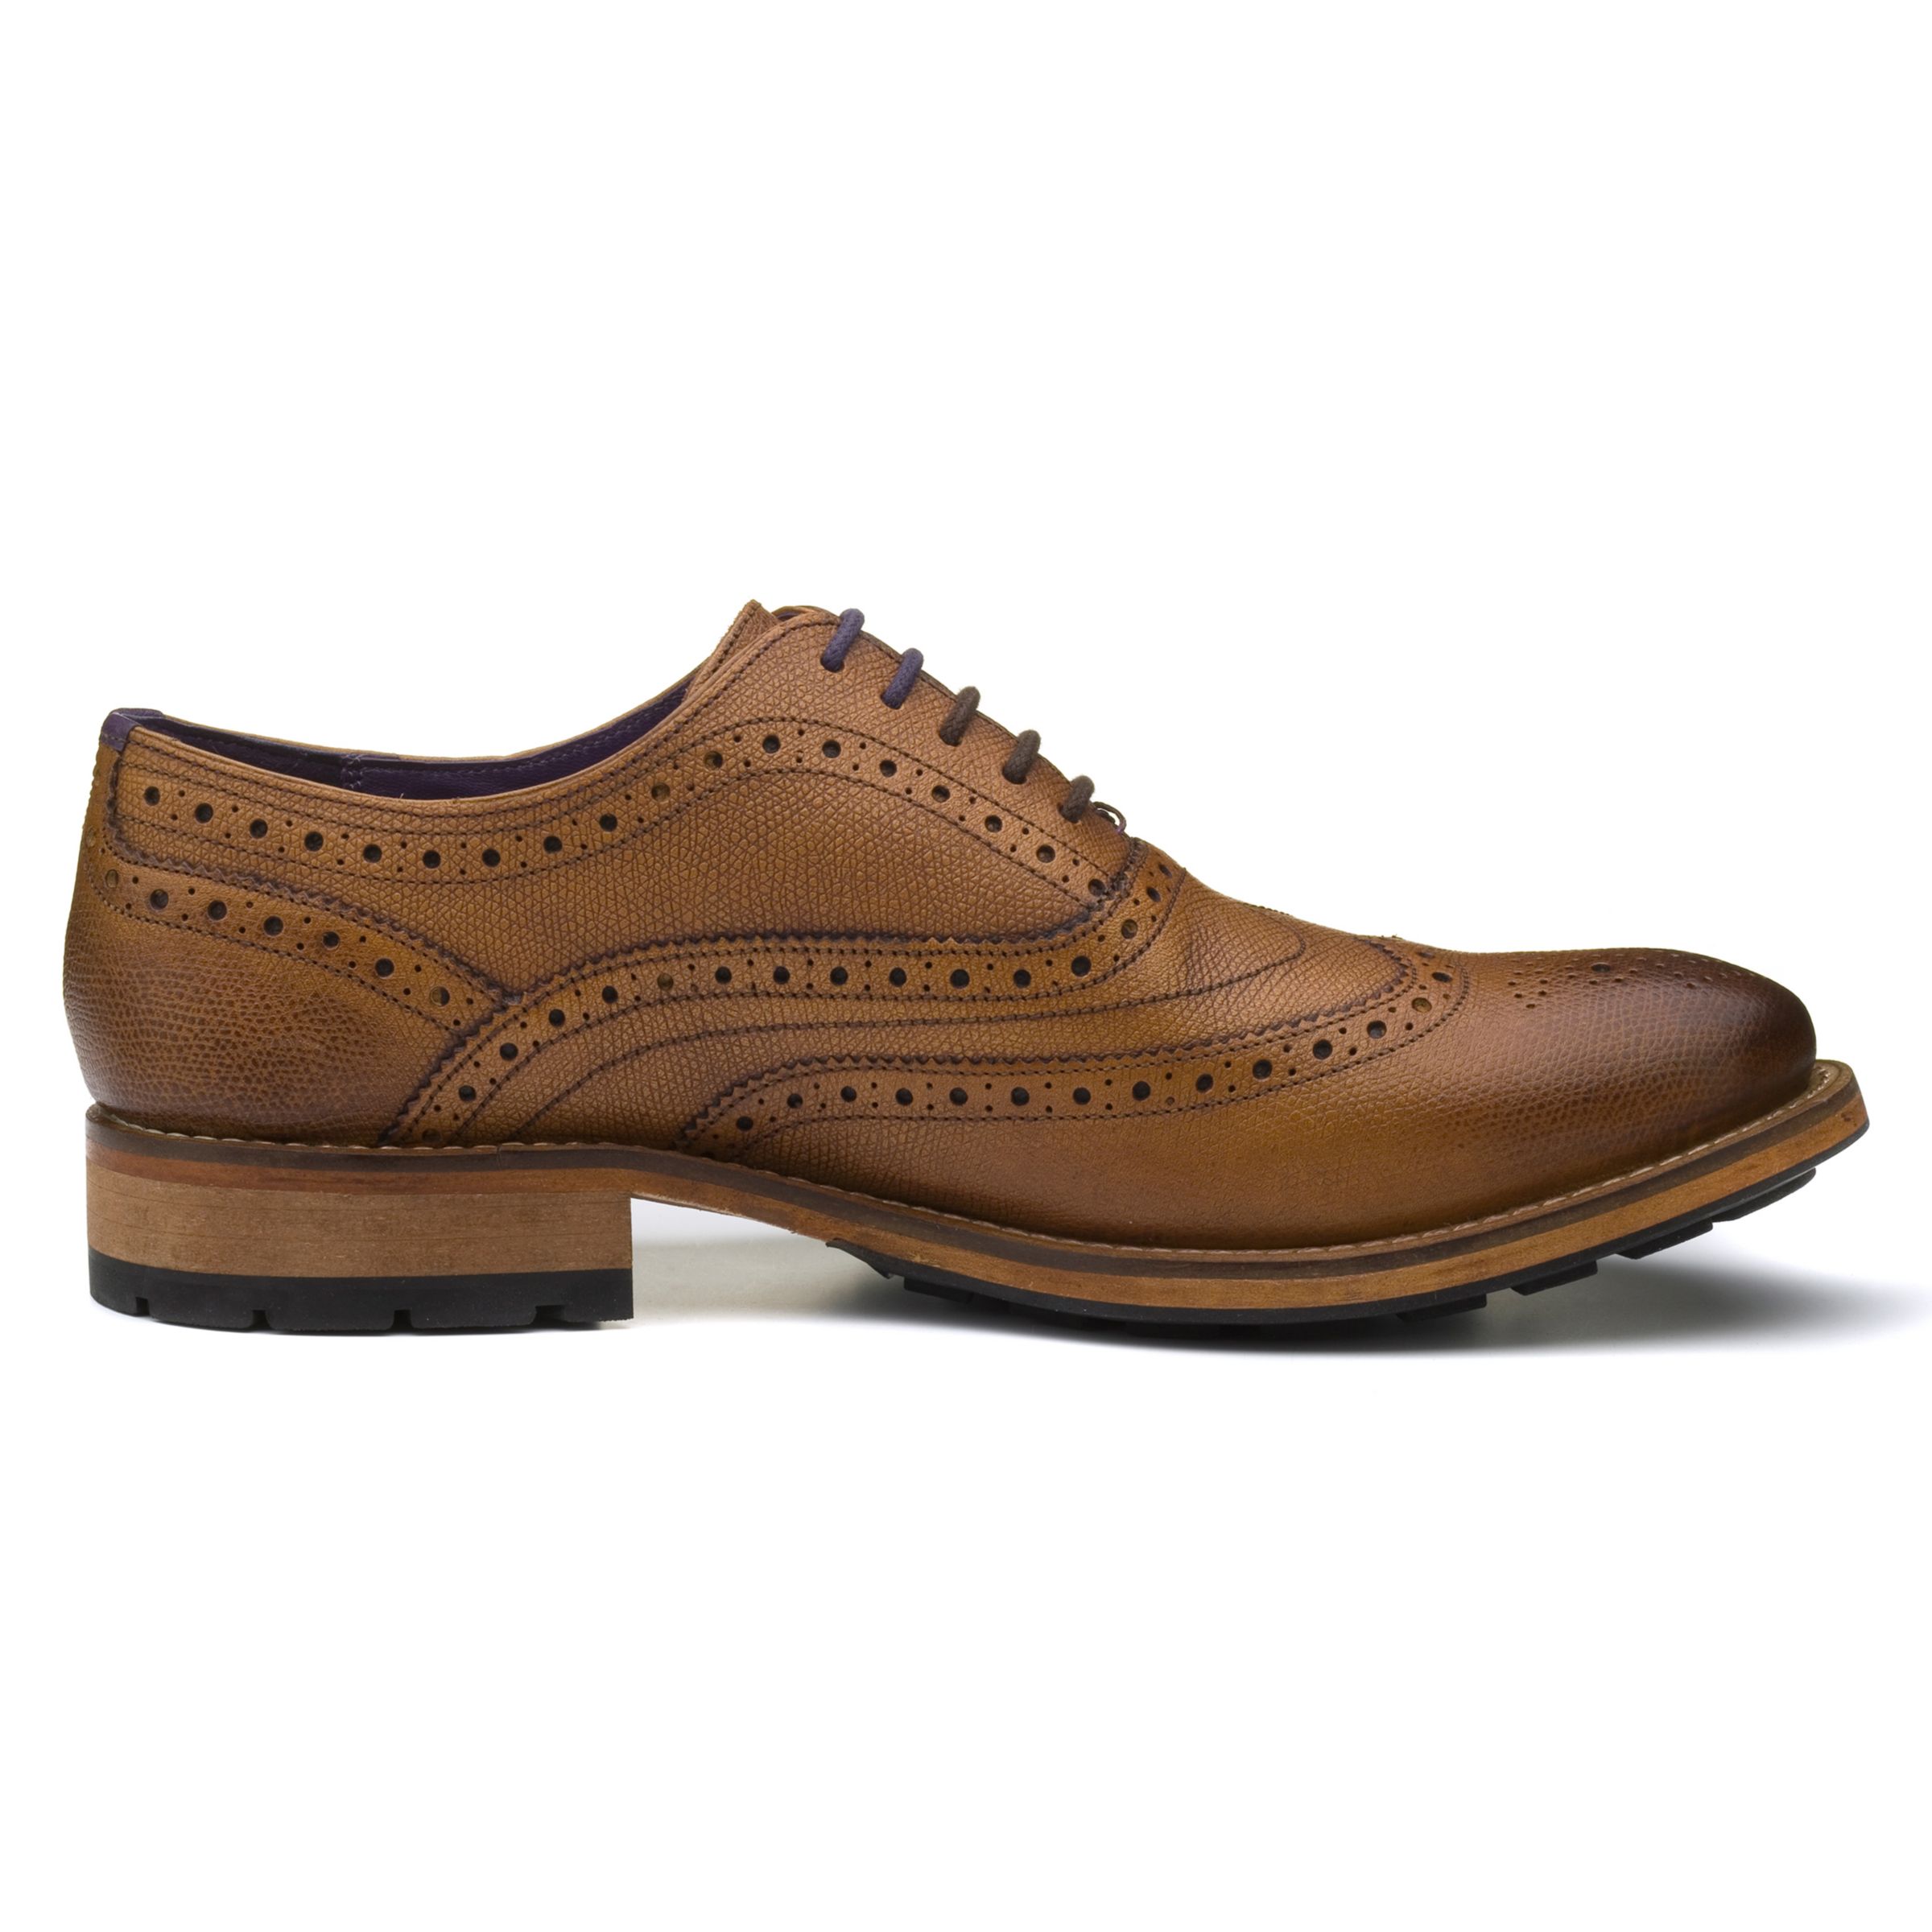 Ted Baker Guri 8 Lace-Up Oxford Brogues, Tan